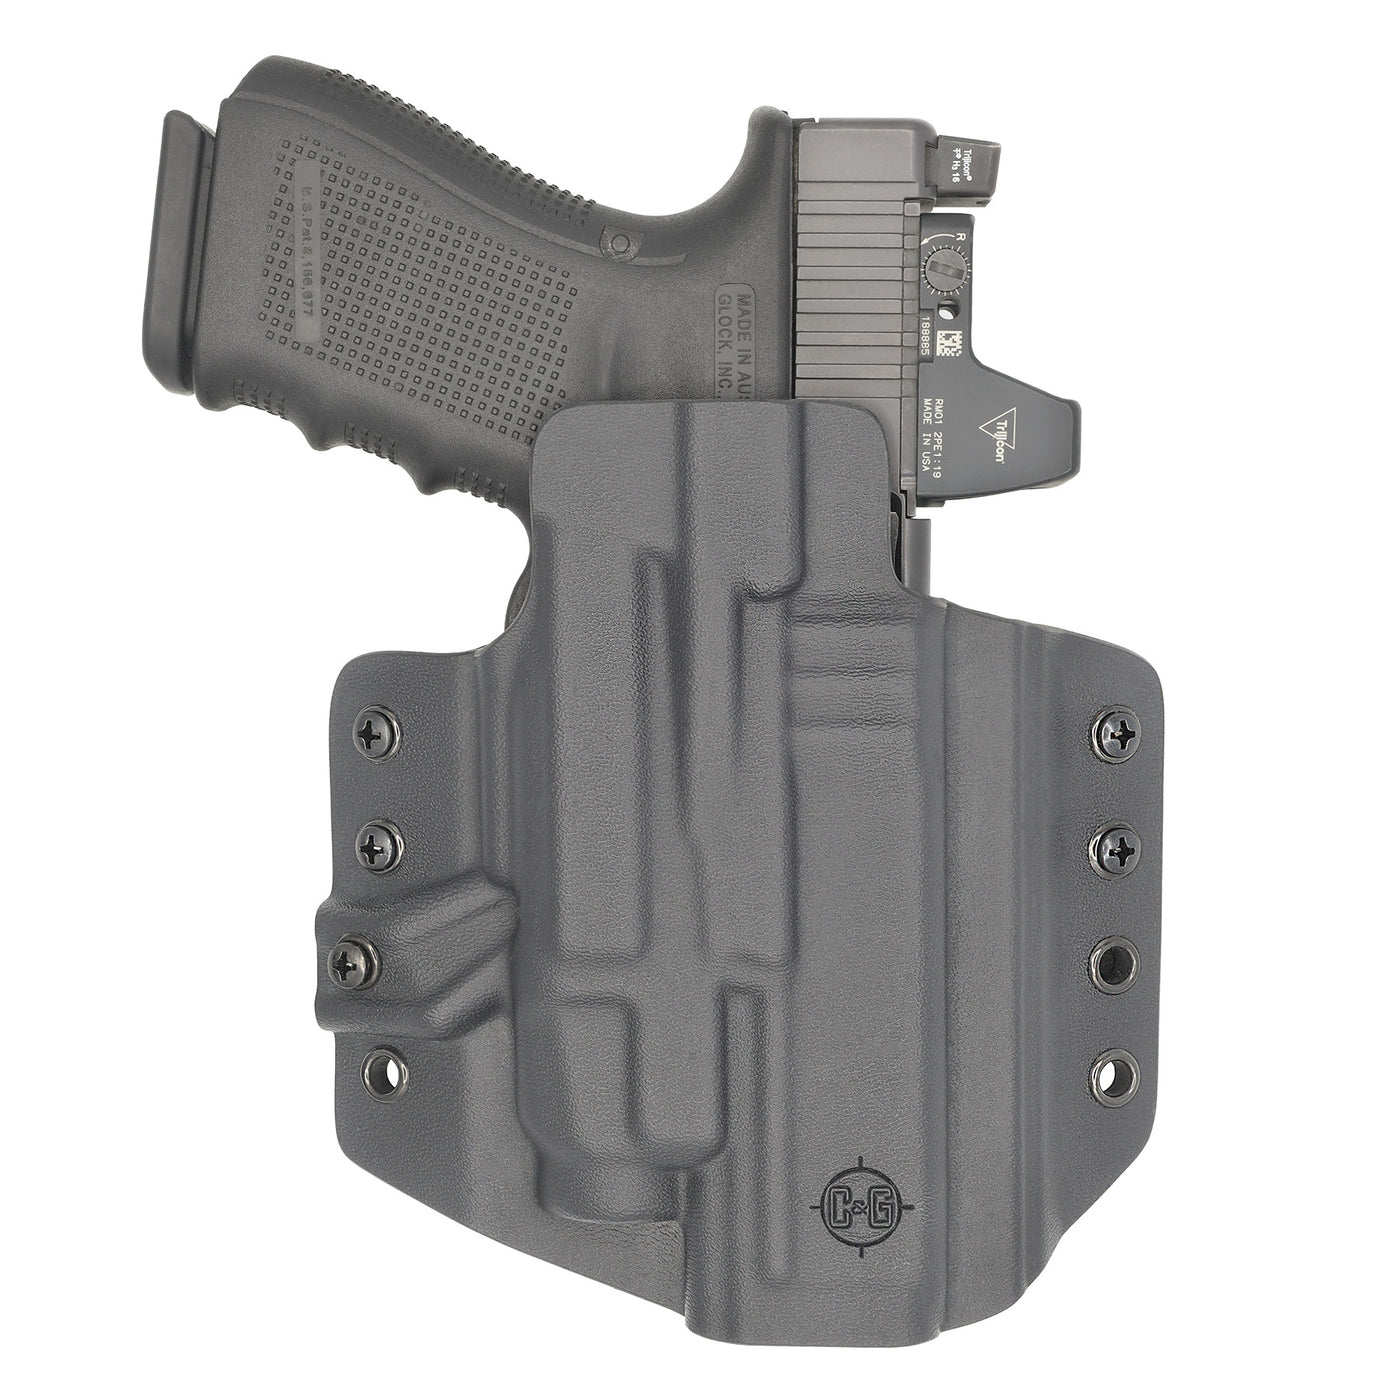 C&G Holsters Quickship OWB Tactical Glock 19/23 Streamlight TLR7 in holstered position